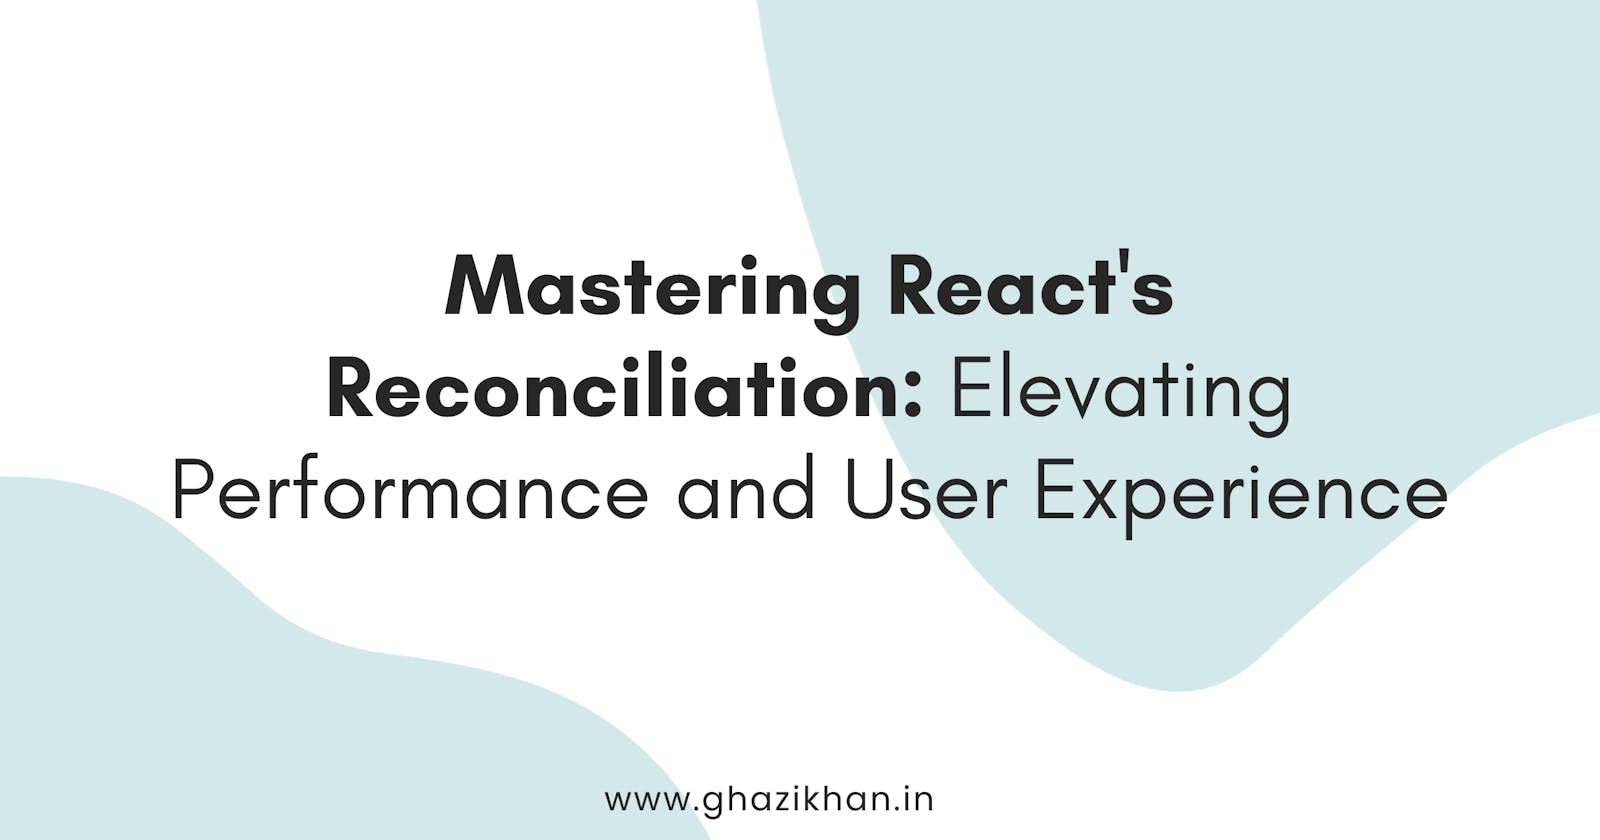 Mastering React's Reconciliation: Elevating Performance and User Experience